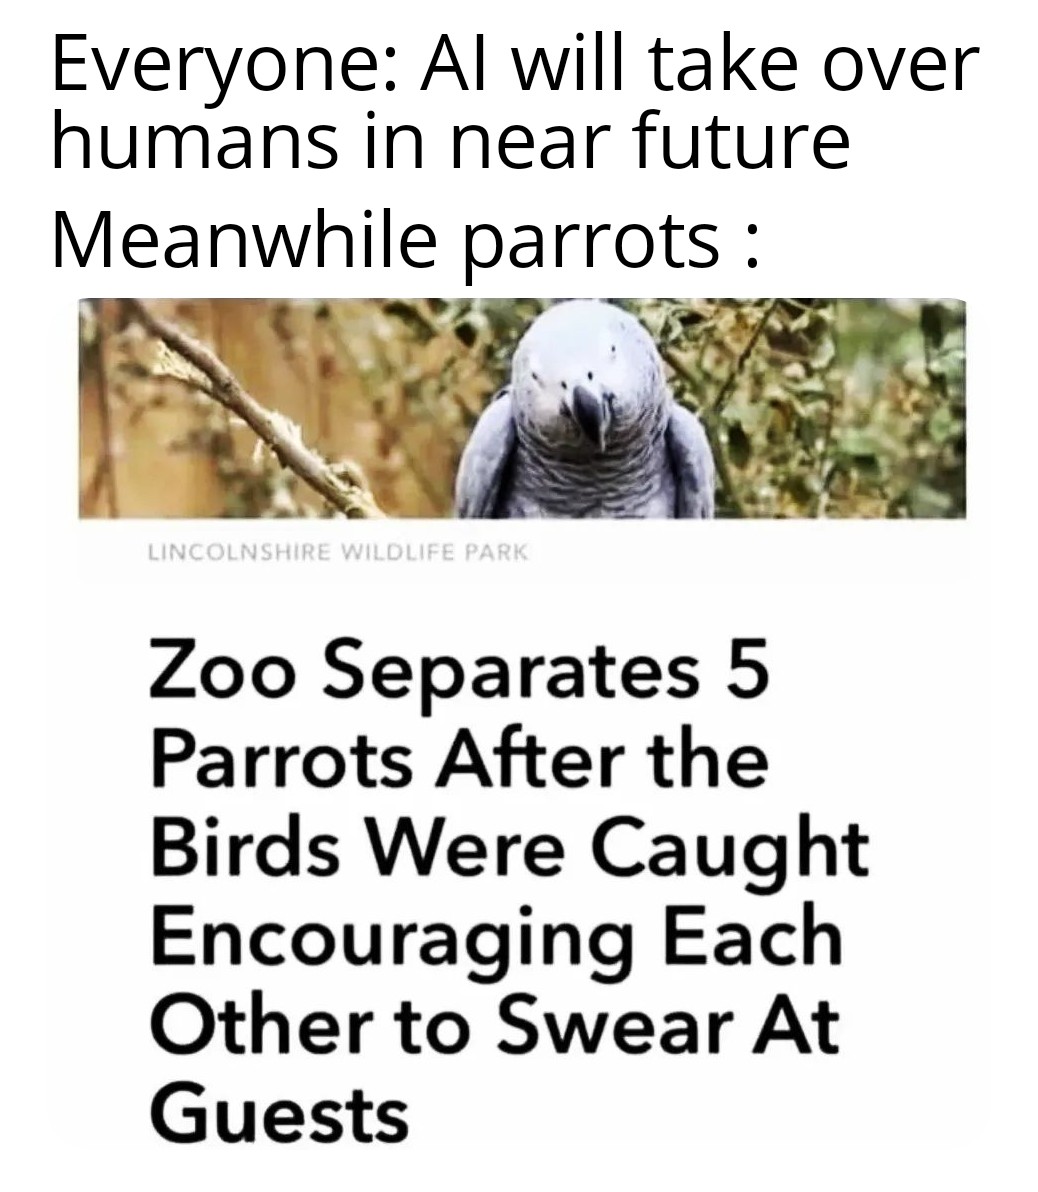 funny memes - Friend group - Everyone humans in near future Meanwhile parrots Al will take over Lincolnshire Wildlife Park Zoo Separates 5 Parrots After the Birds Were Caught Encouraging Each Other to Swear At Guests